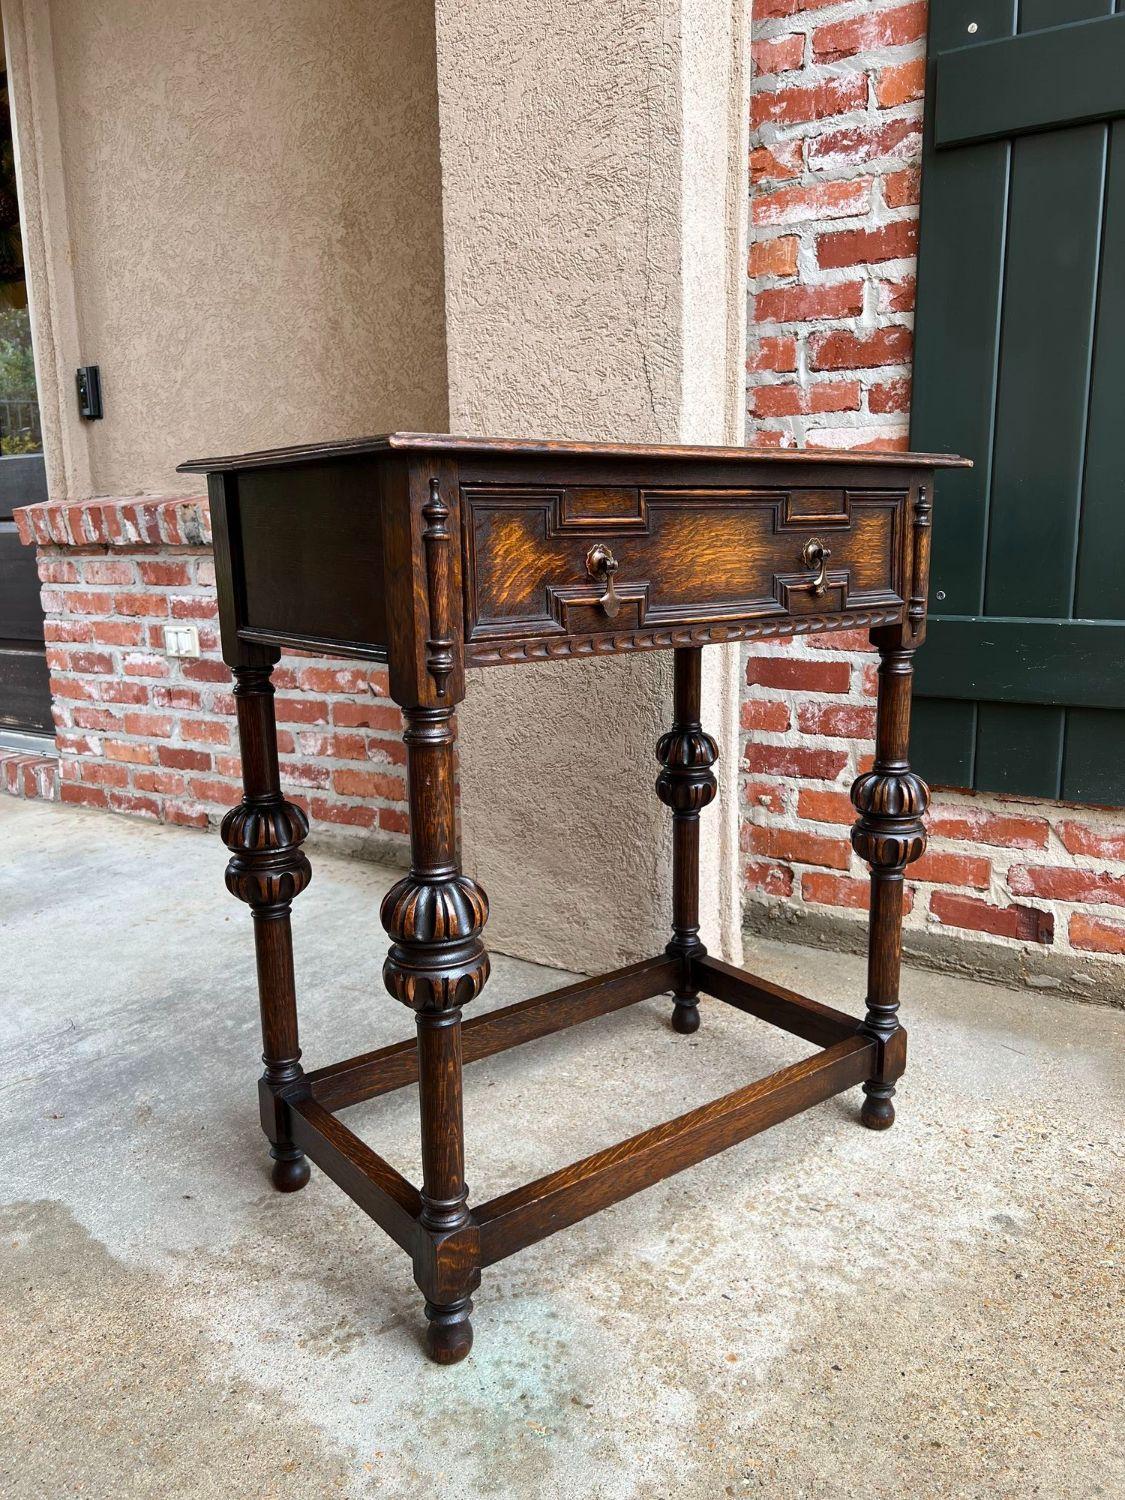 Antique English hall sofa table Jacobean carved oak c1920.

Direct from England, a charming British sofa or hall table. Classic Jacobean style with a geometric paneled wide front drawer and original brass drop drawer pulls. Jacobean trim to either